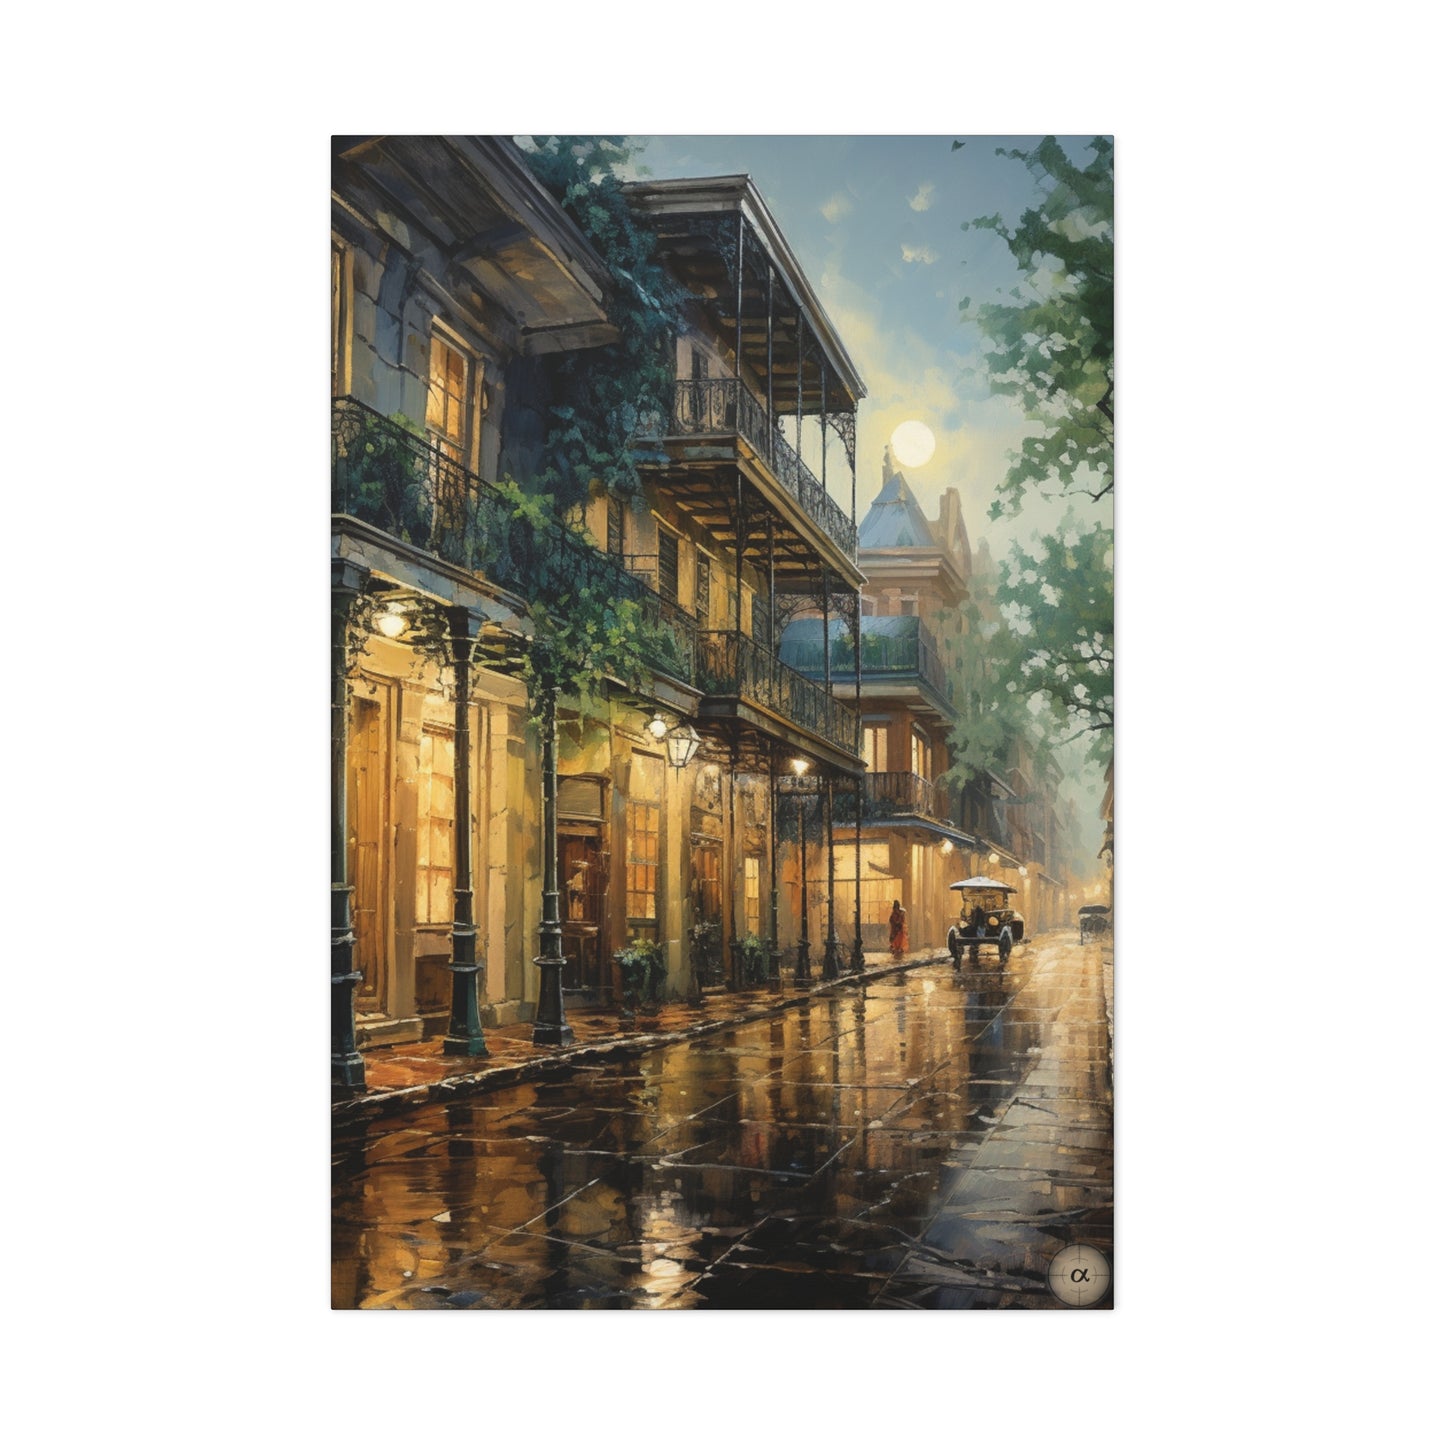 Art by Kendyll: "French Quarter" on Canvas